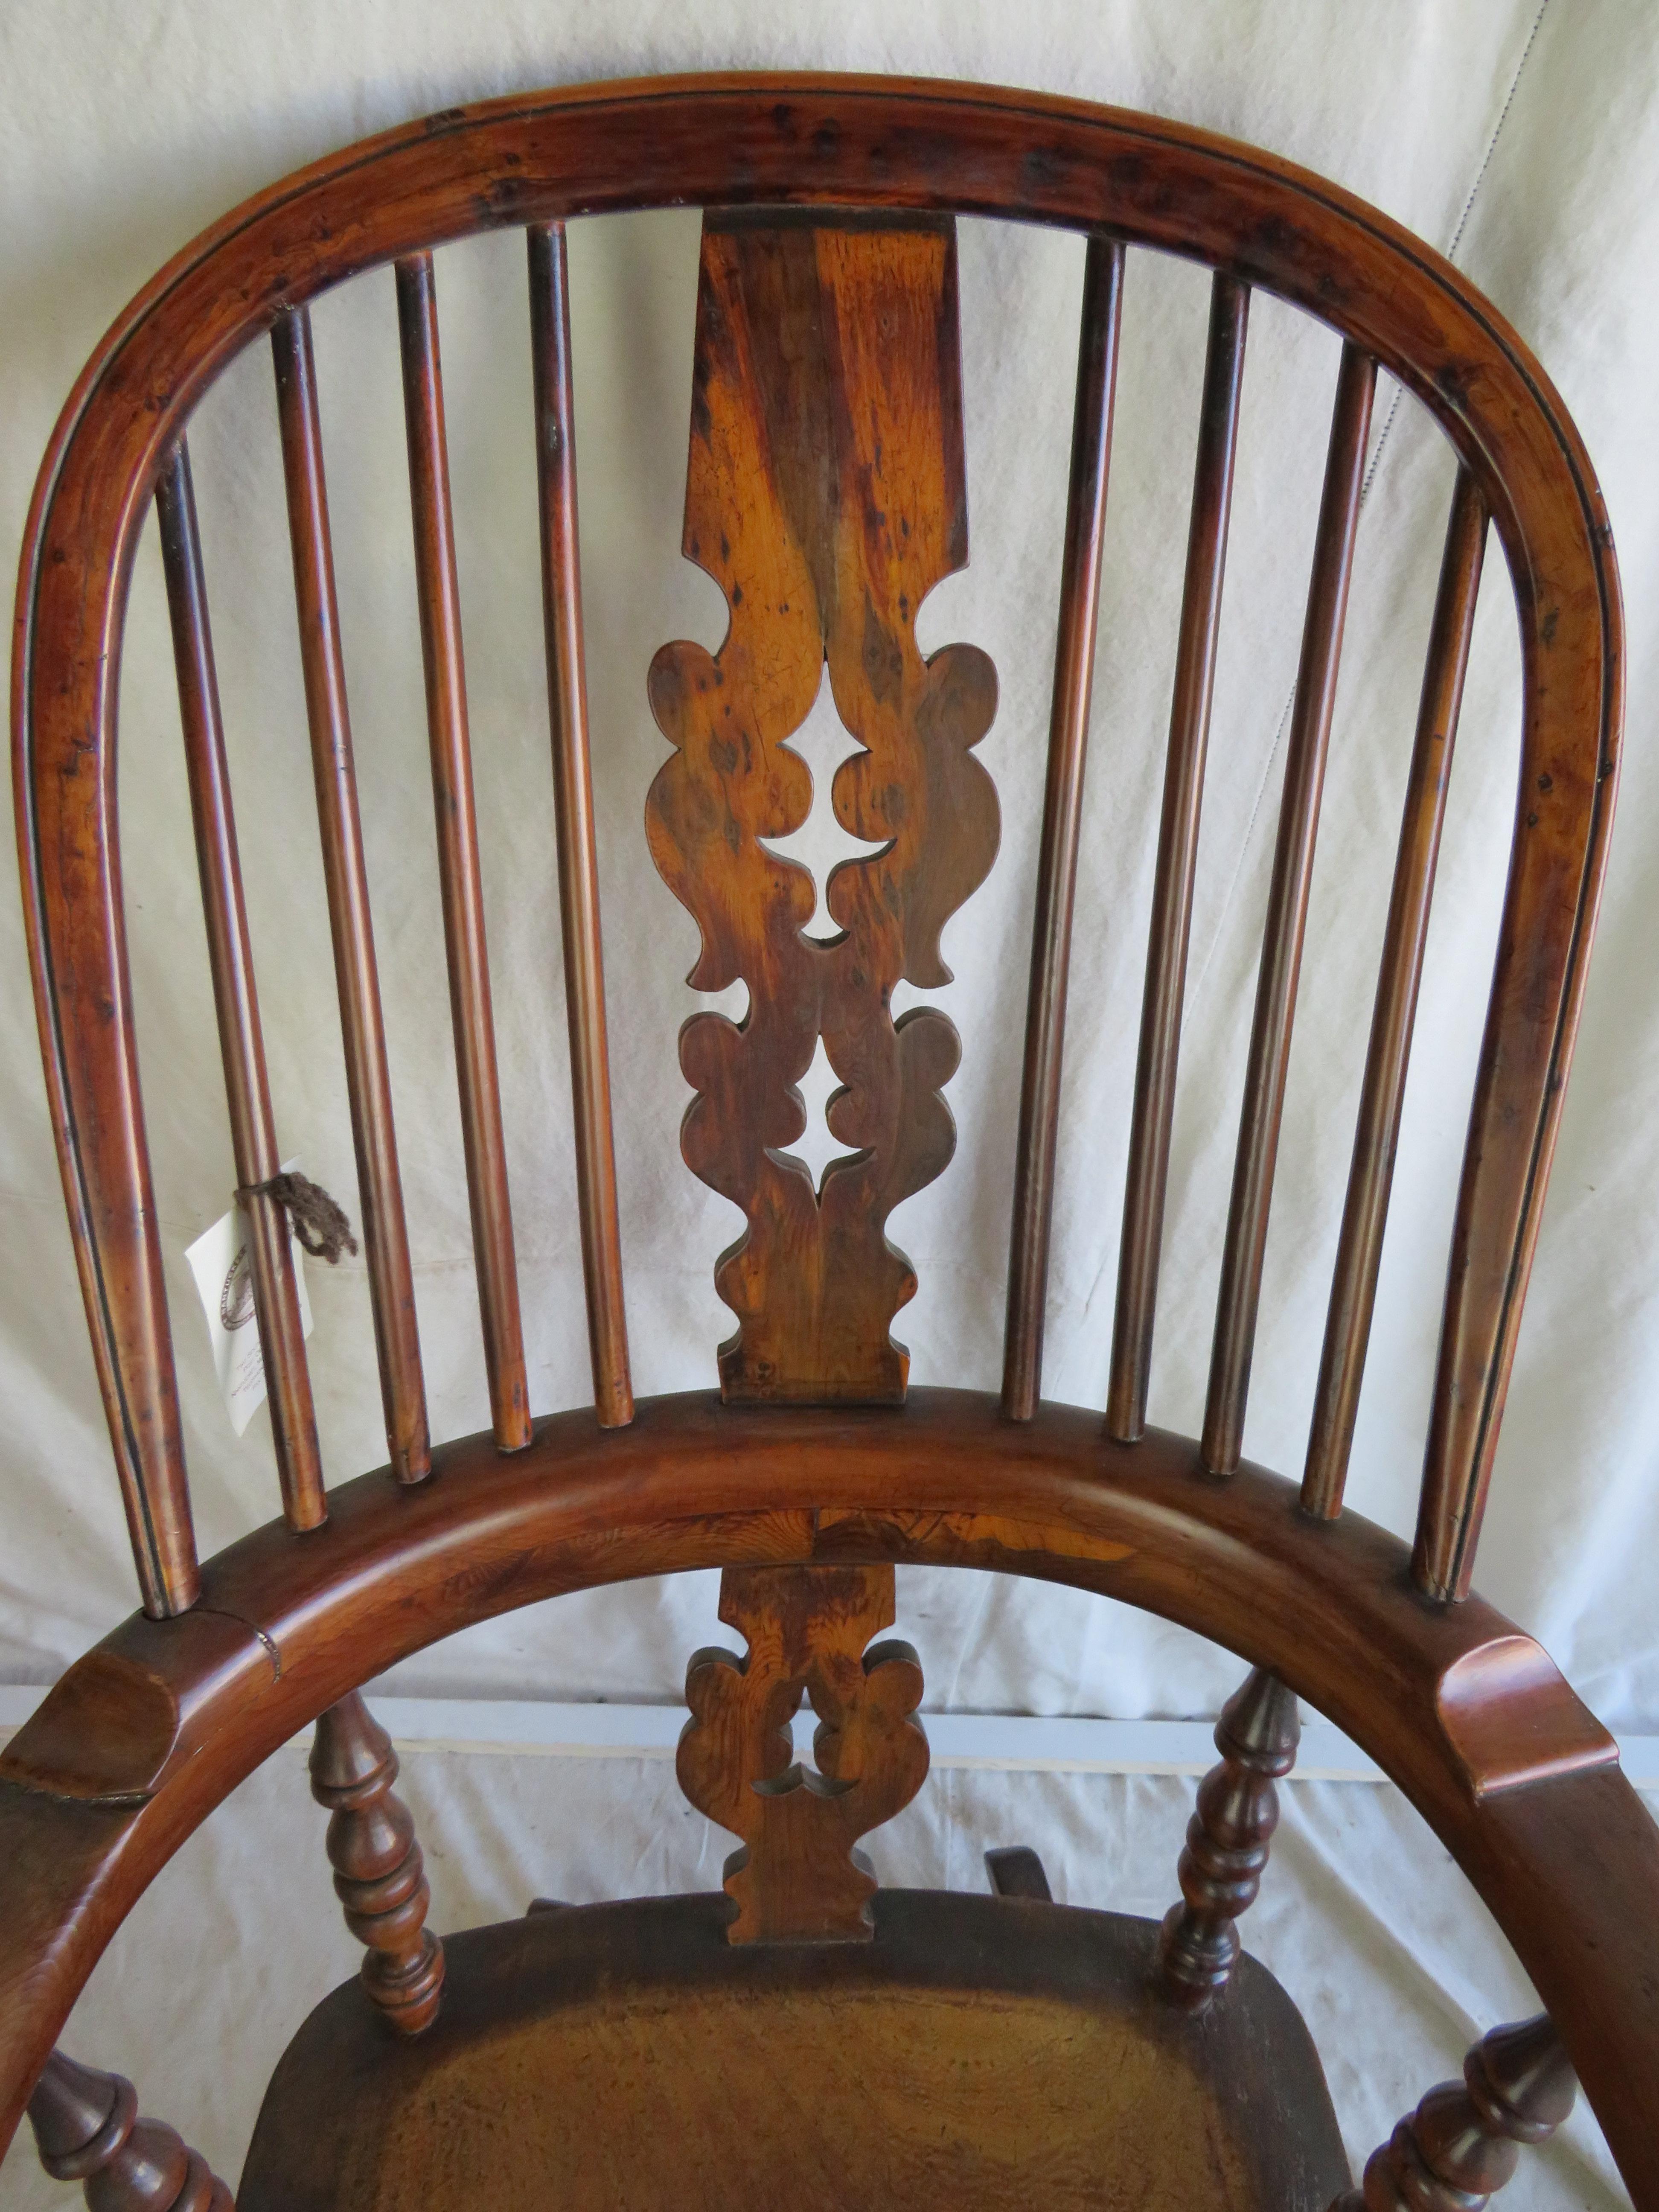 English Yew wood Windsor rocking chair with carved and pierced splat back, saddle seat, and nicely turned legs. 